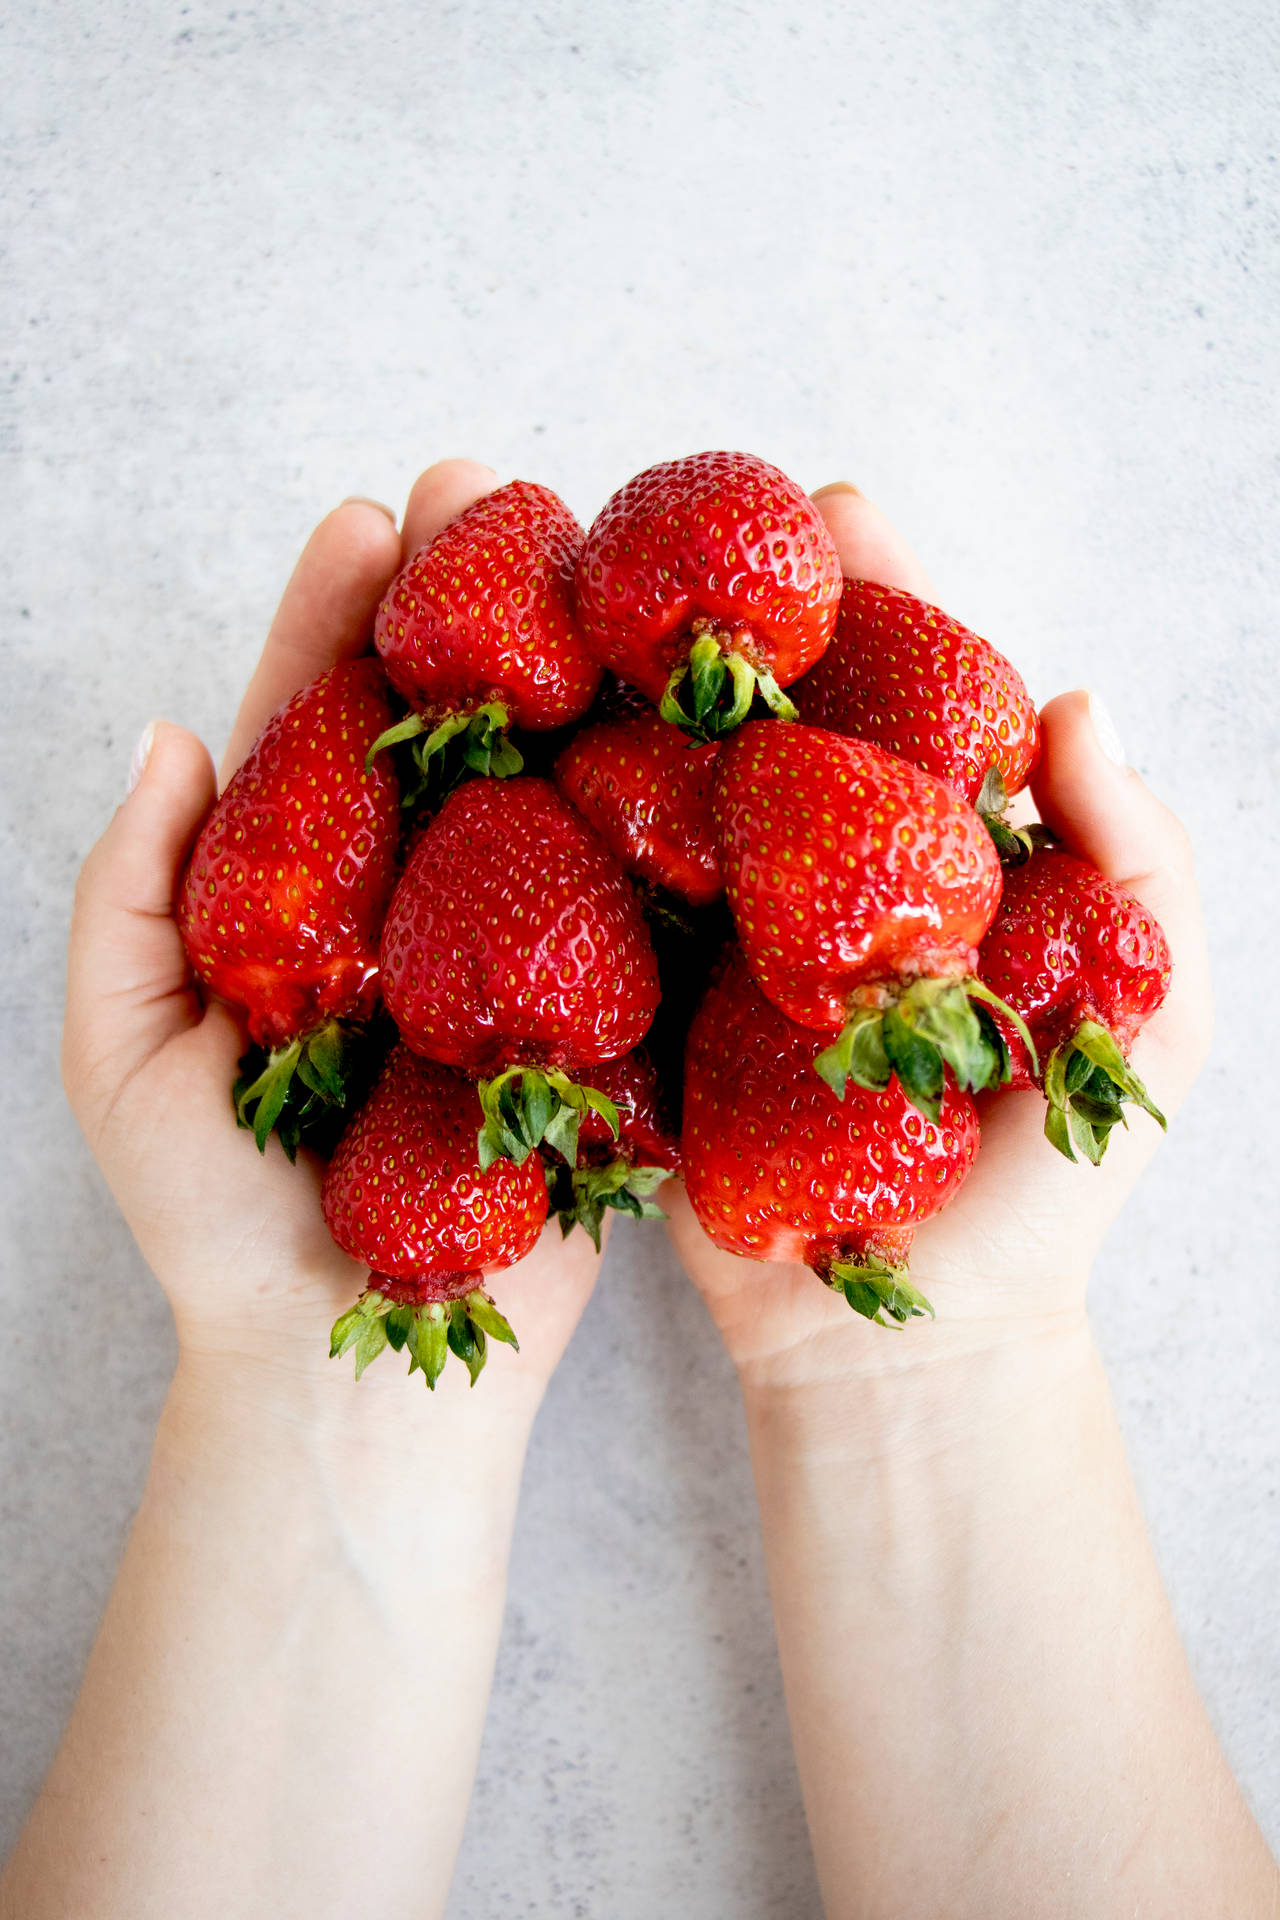 Strawberry 3817X5726 Wallpaper and Background Image